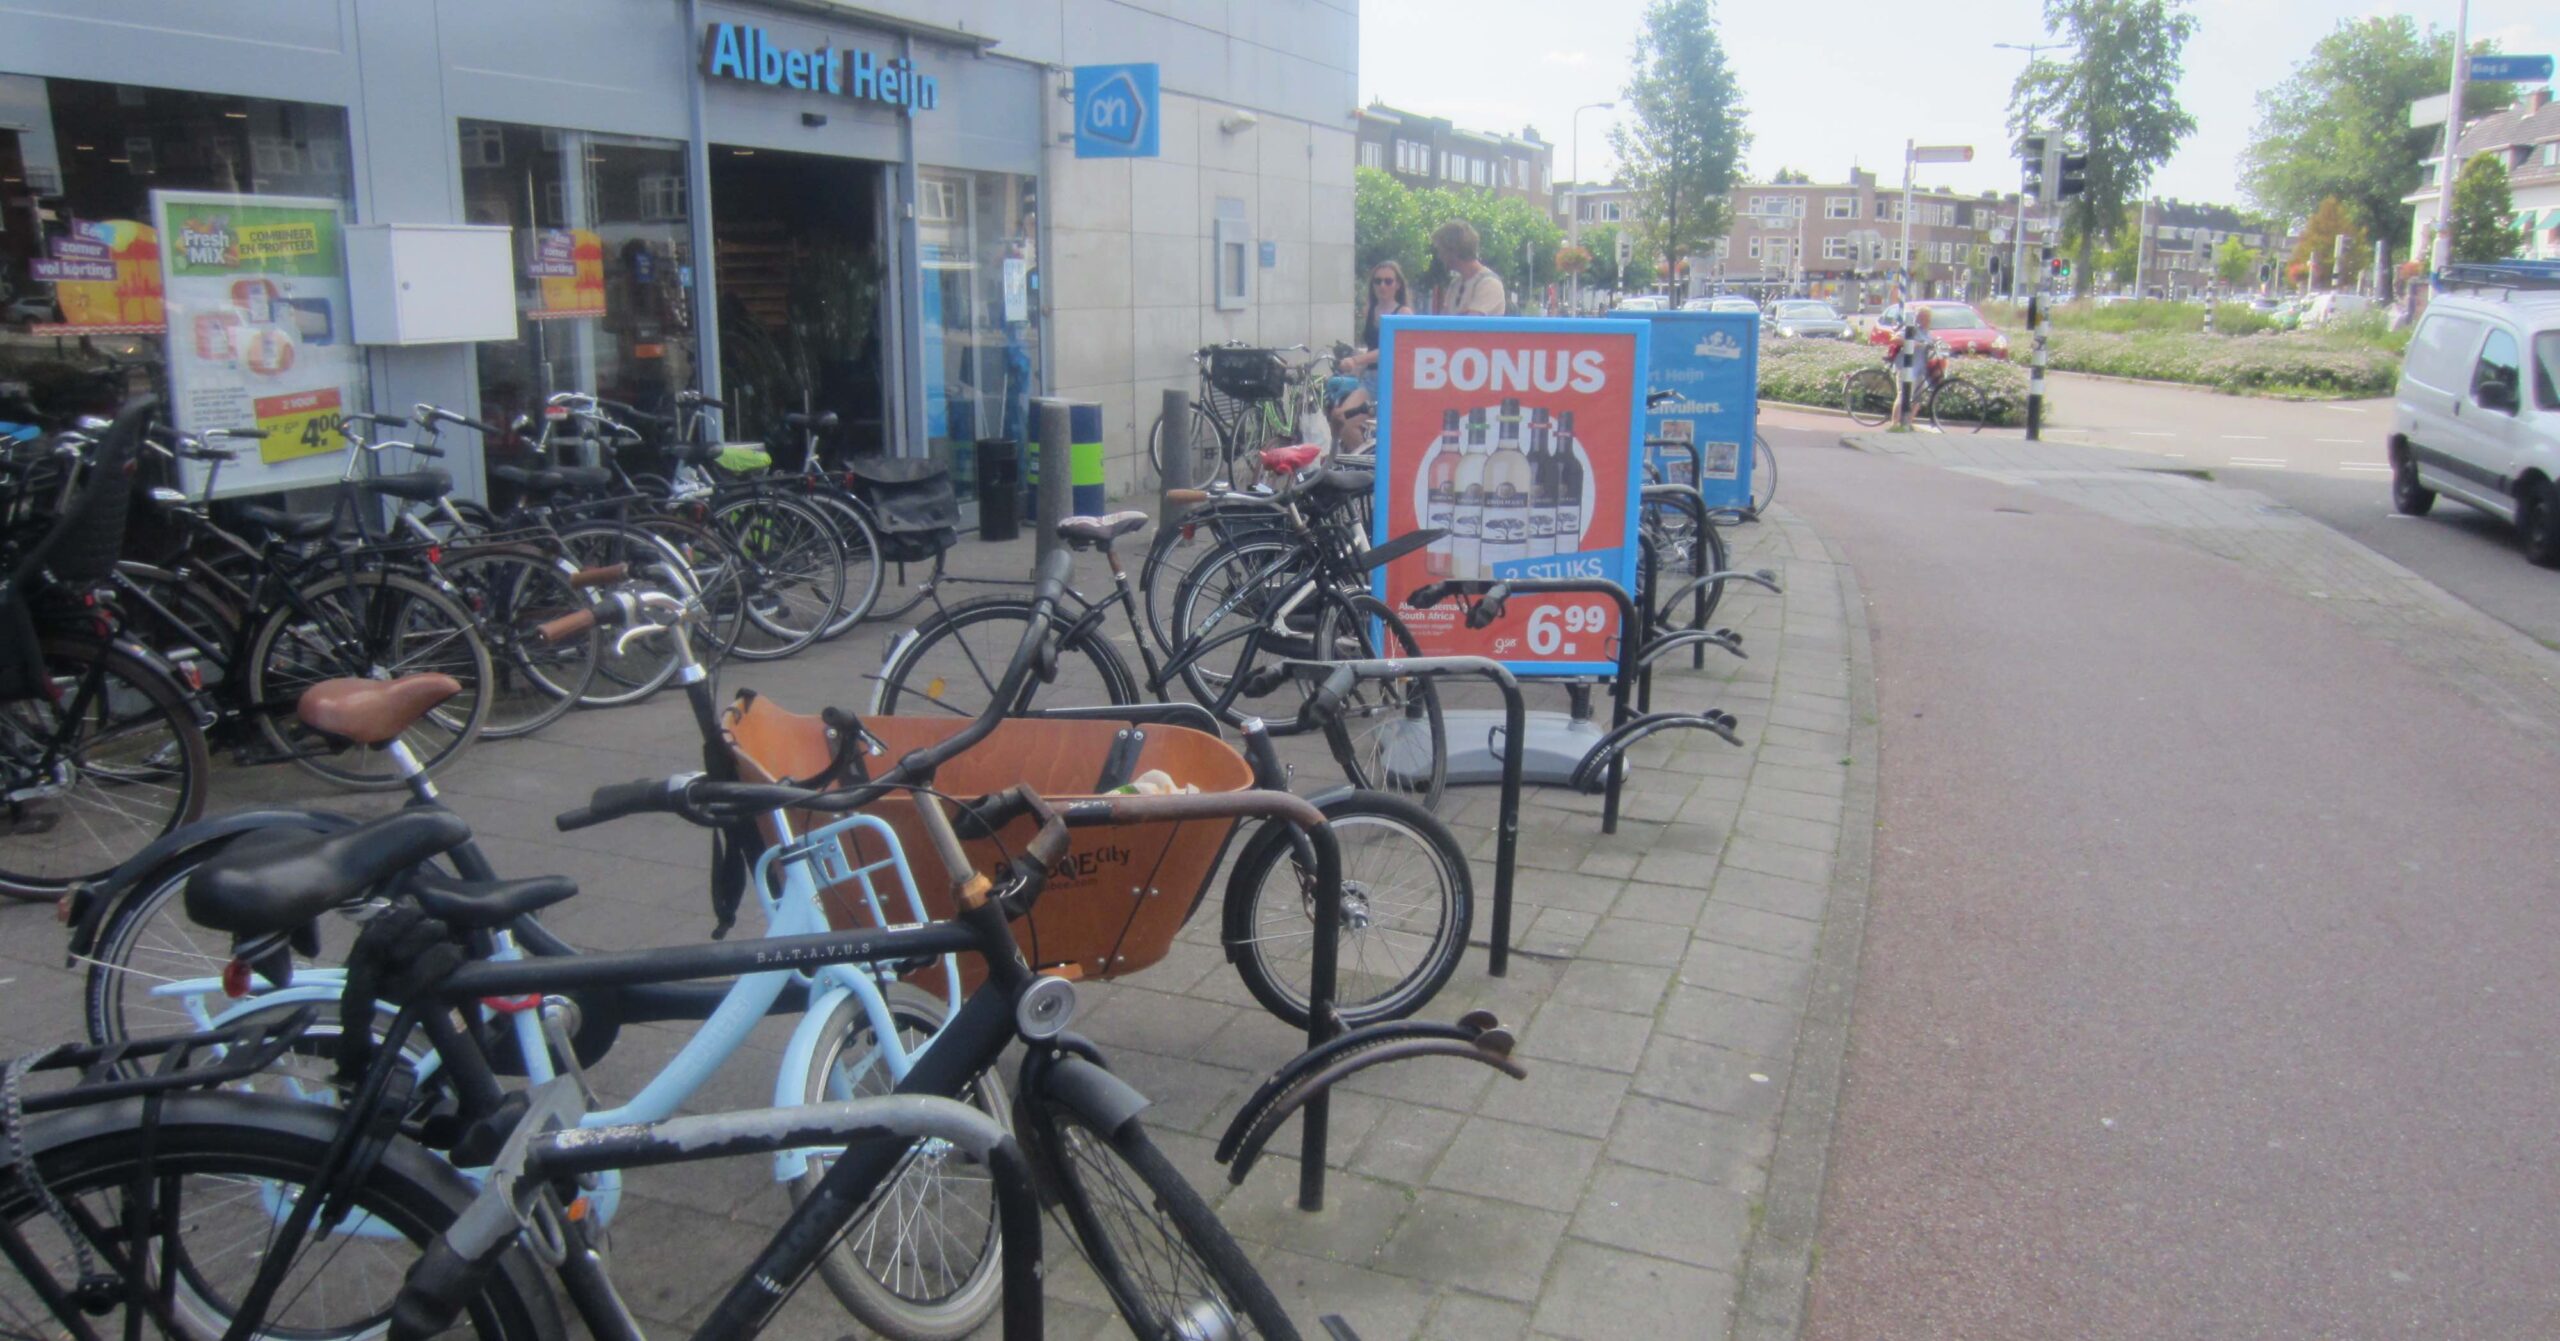 A local Dutch supermarket showing cycle parking for customers and a traffic-free cycle path